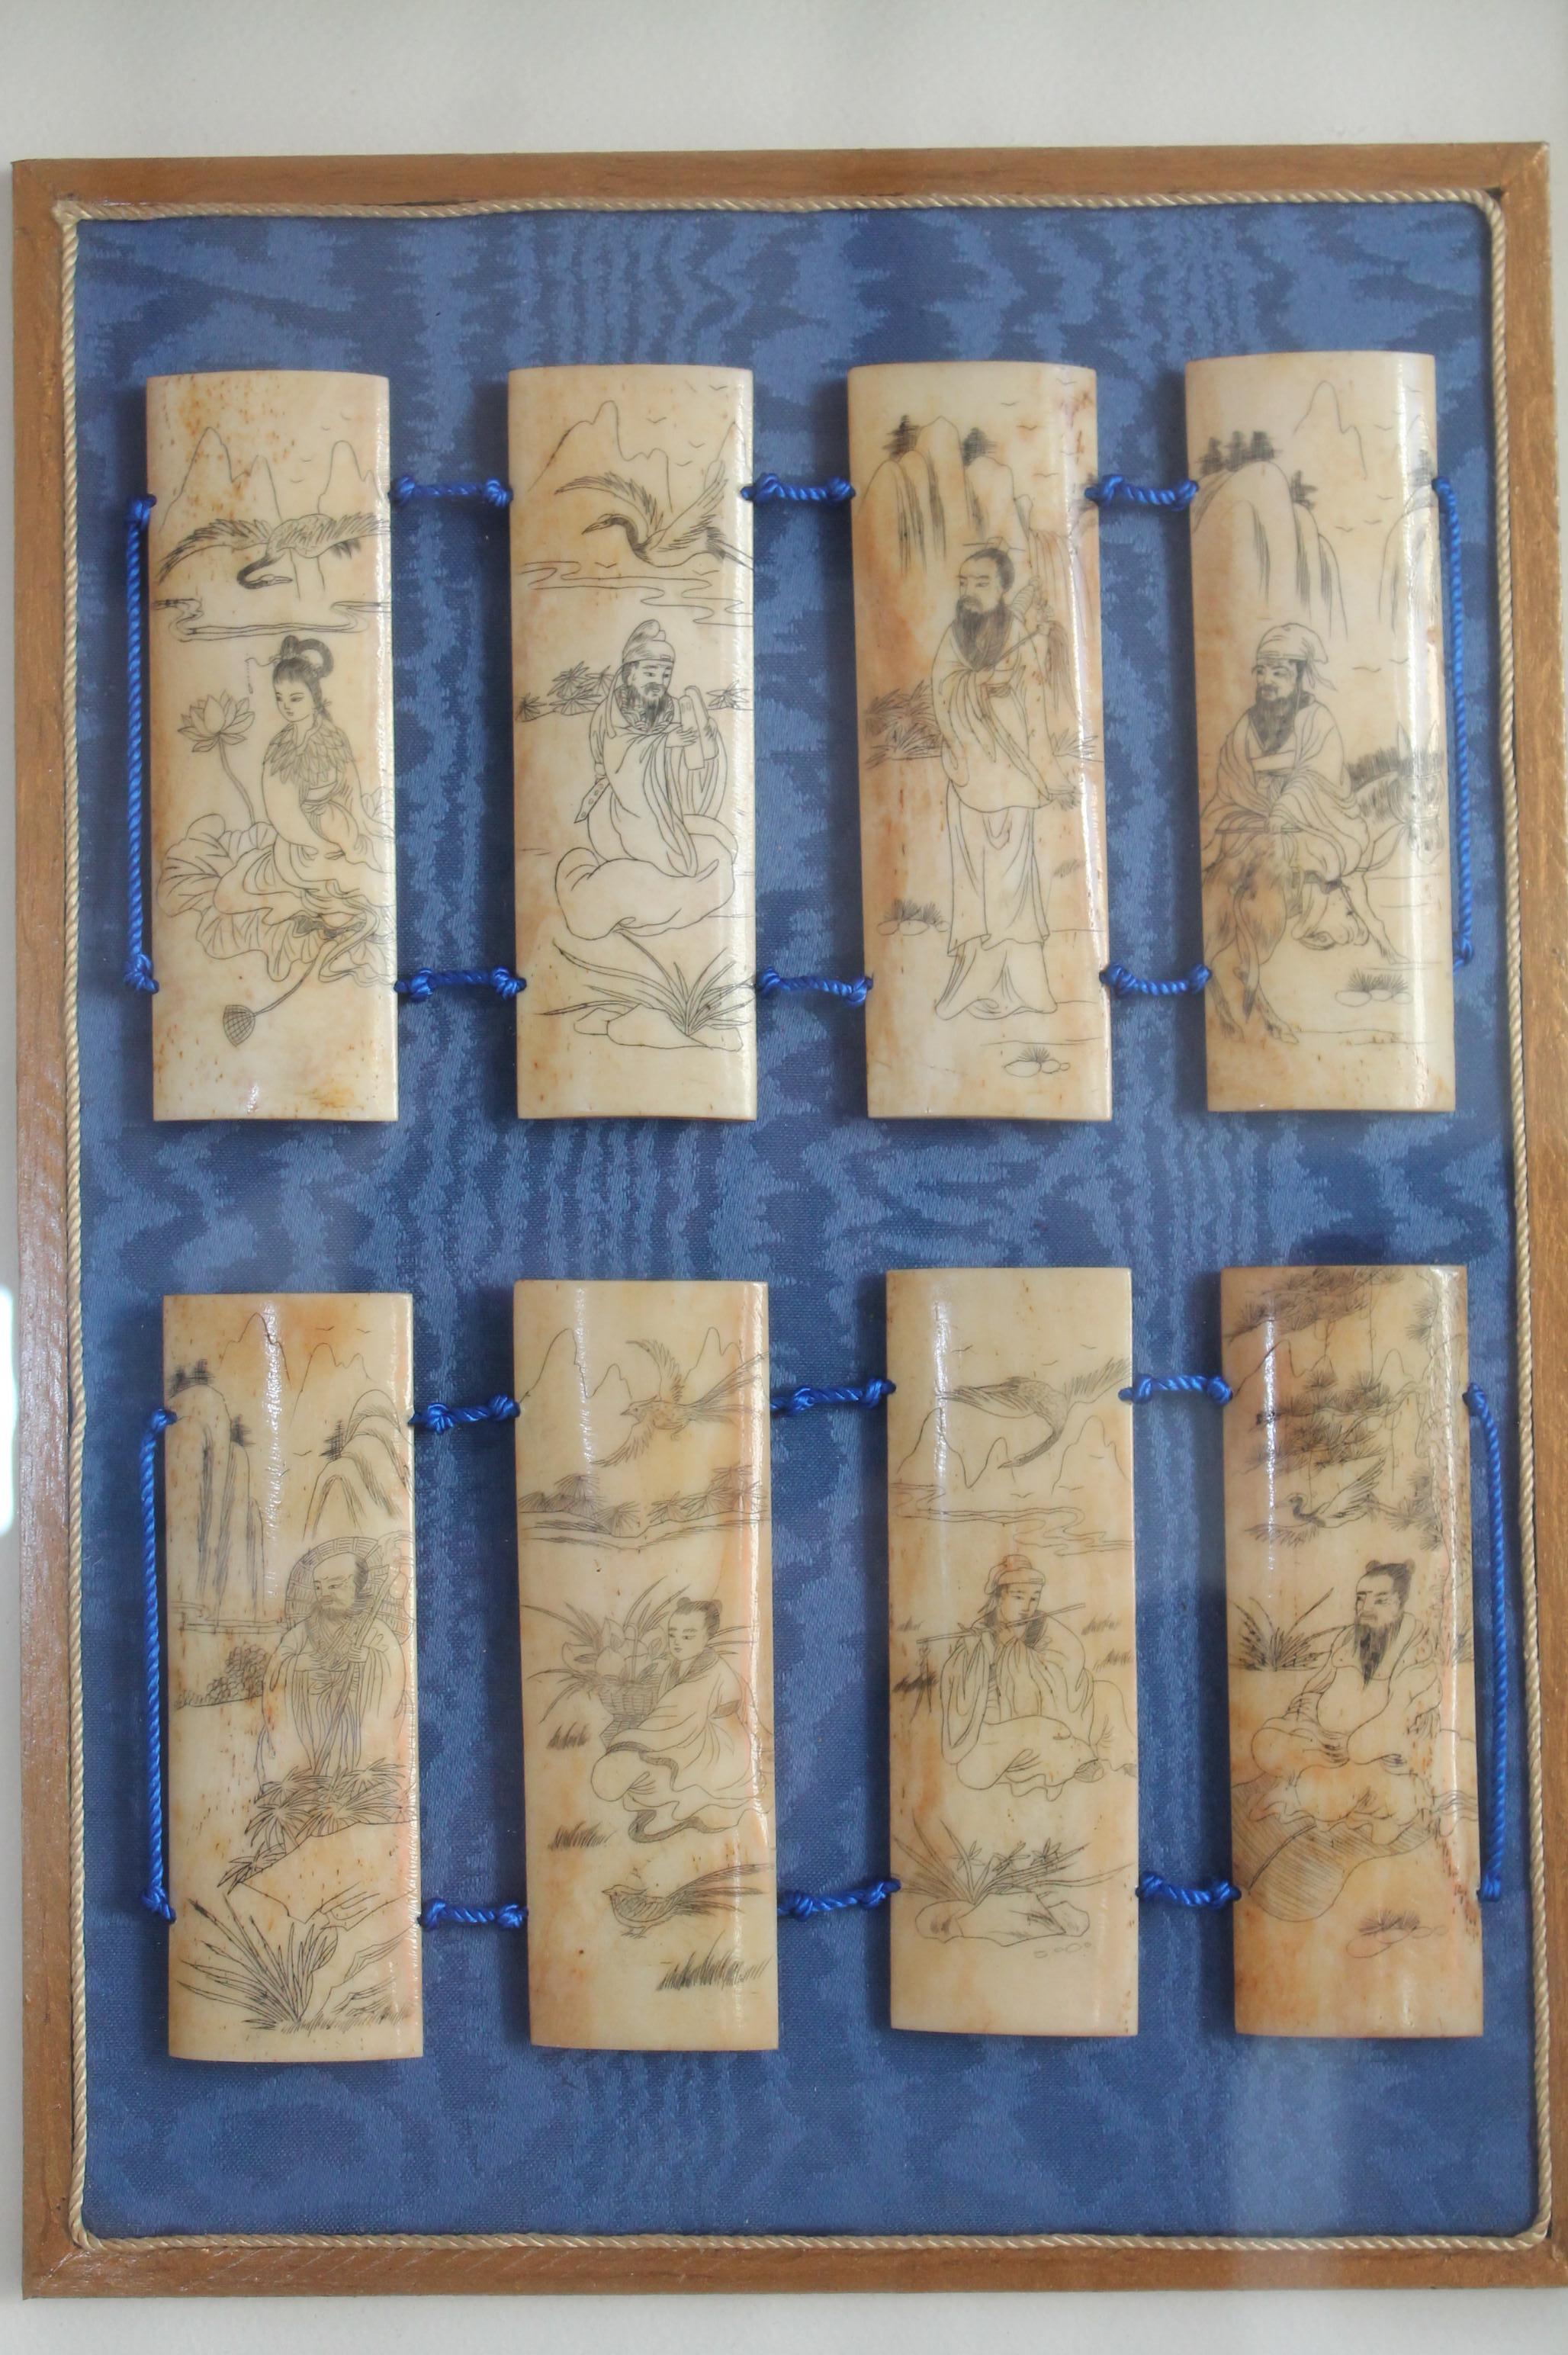 Antique Scrimshaw bone etched/carved panels from the 19th century.
It is richly adorned with flowers (lotus and more), birds, mountain scenes, and empire figurines in a great box framing presentation in Radica.

Measures: 10x4cm (4x1.75in.) each